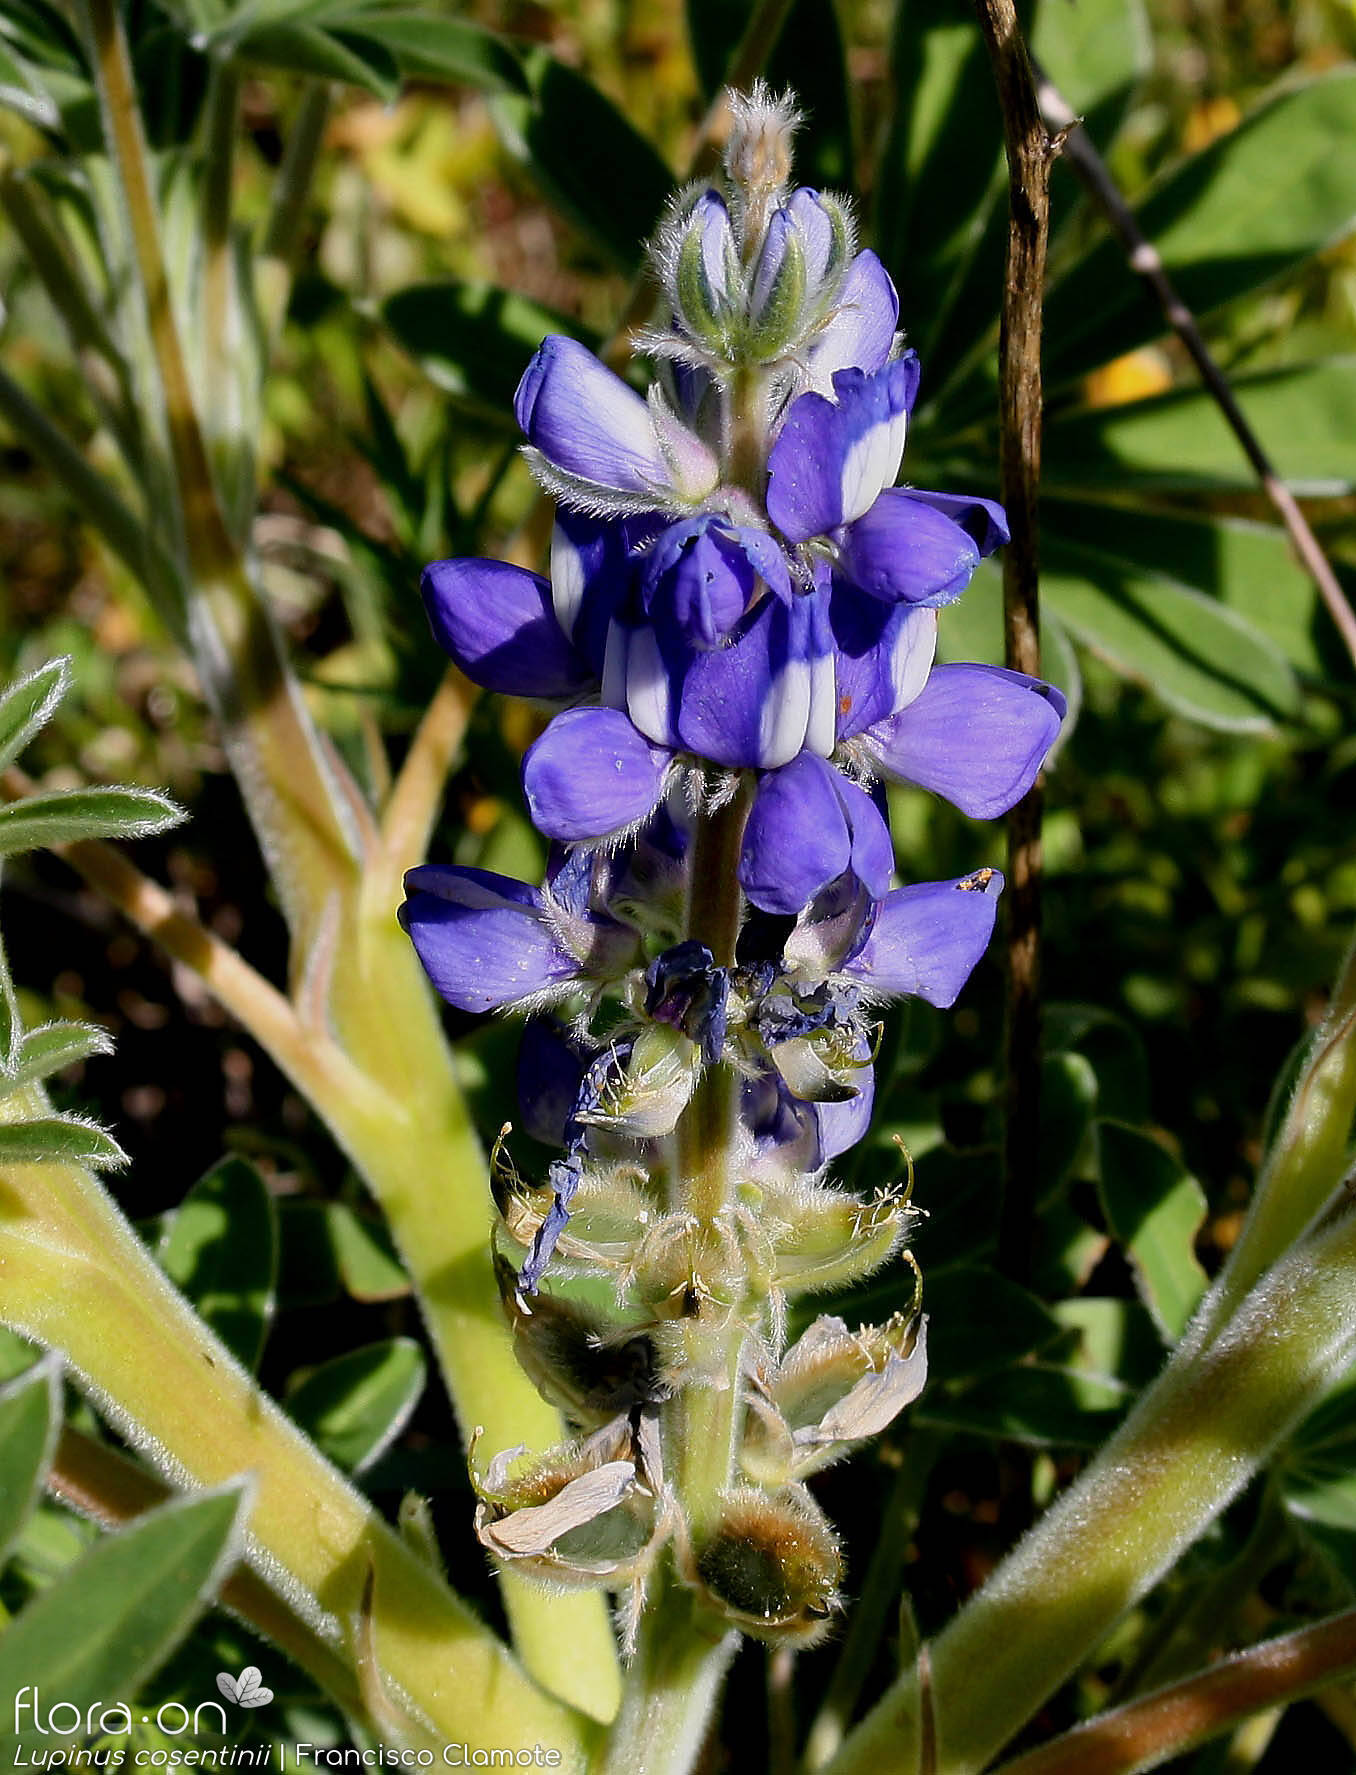 Lupinus cosentinii - Flor (geral) | Francisco Clamote; CC BY-NC 4.0